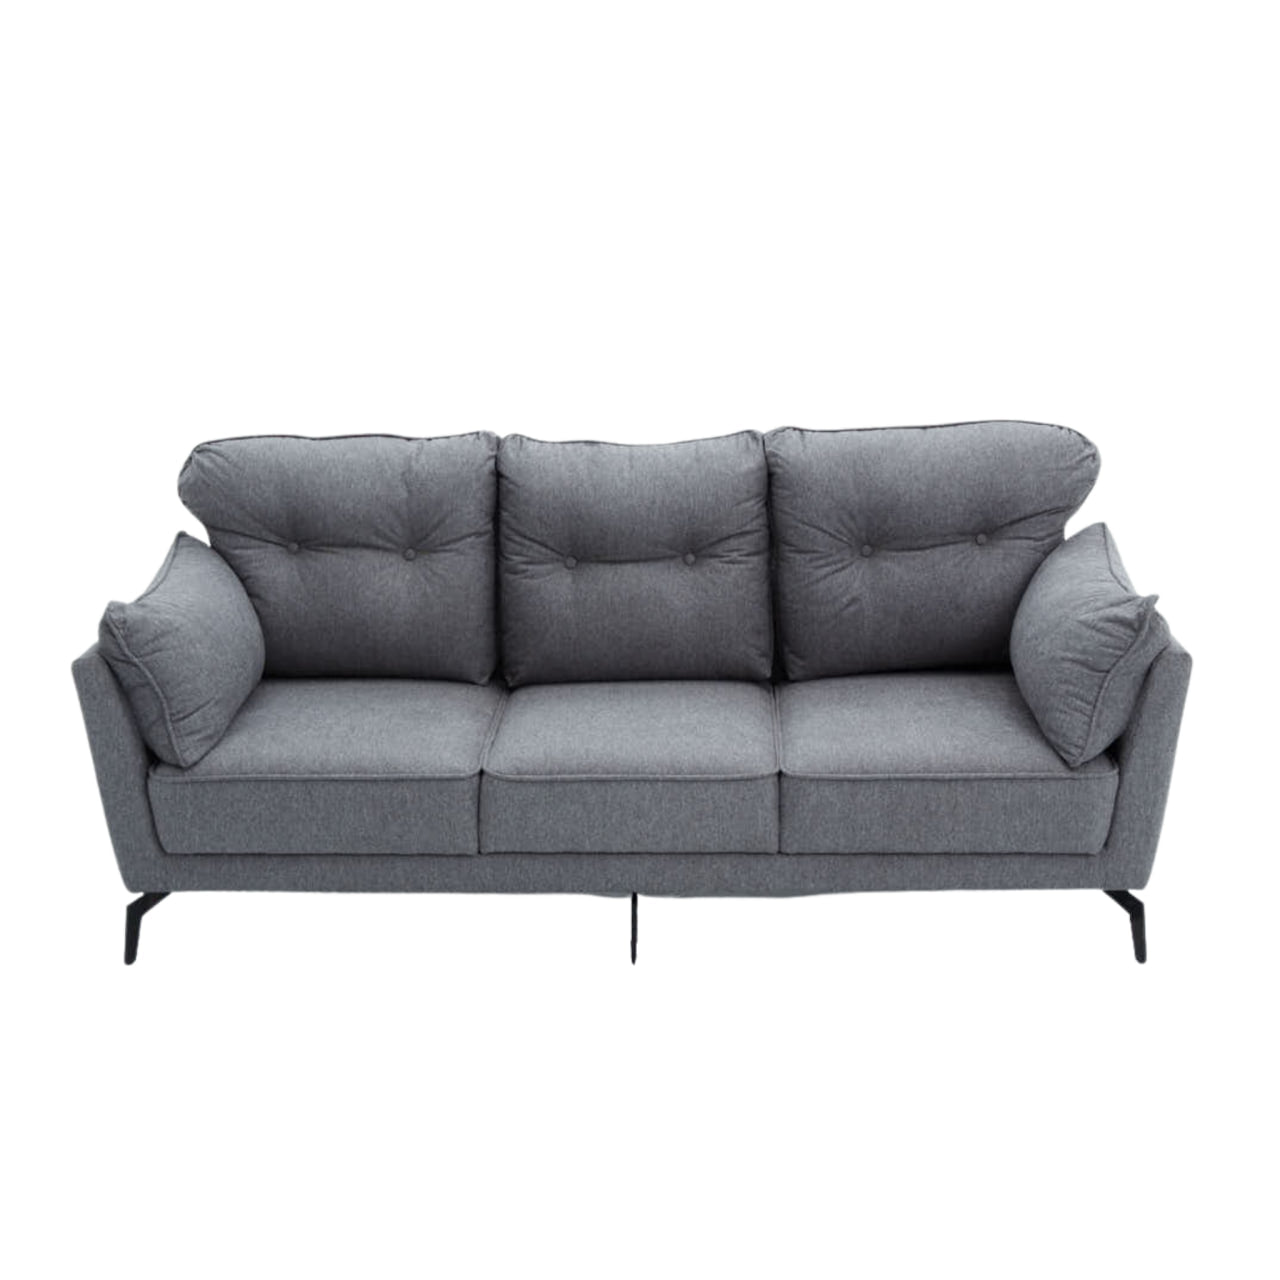 WILLY 3-Seater Fabric Sofa AF Home